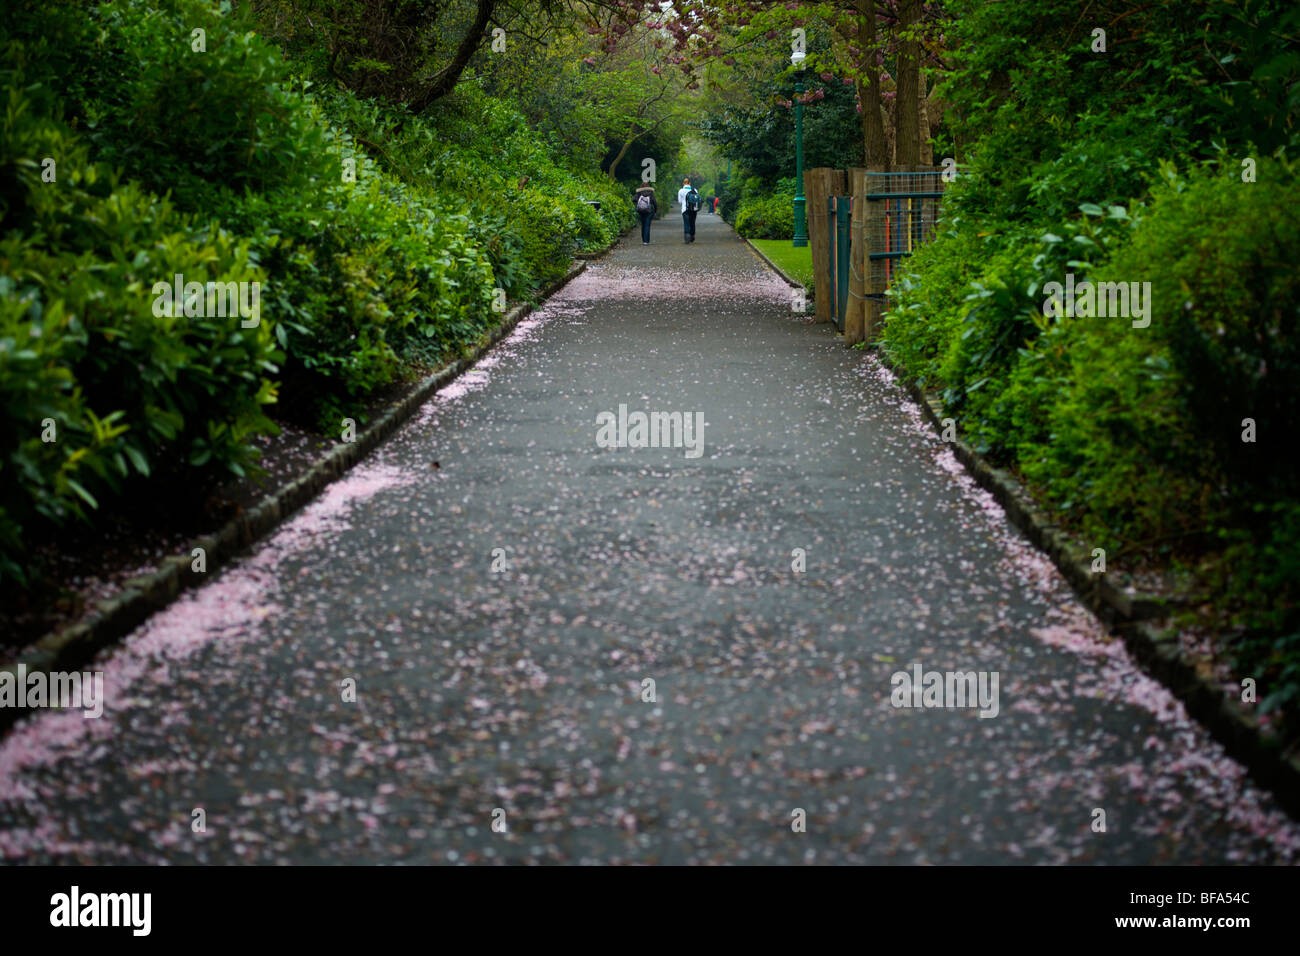 Pepole Walking in Merrion square park dublin with spring time cherry blossom petals on the path Stock Photo